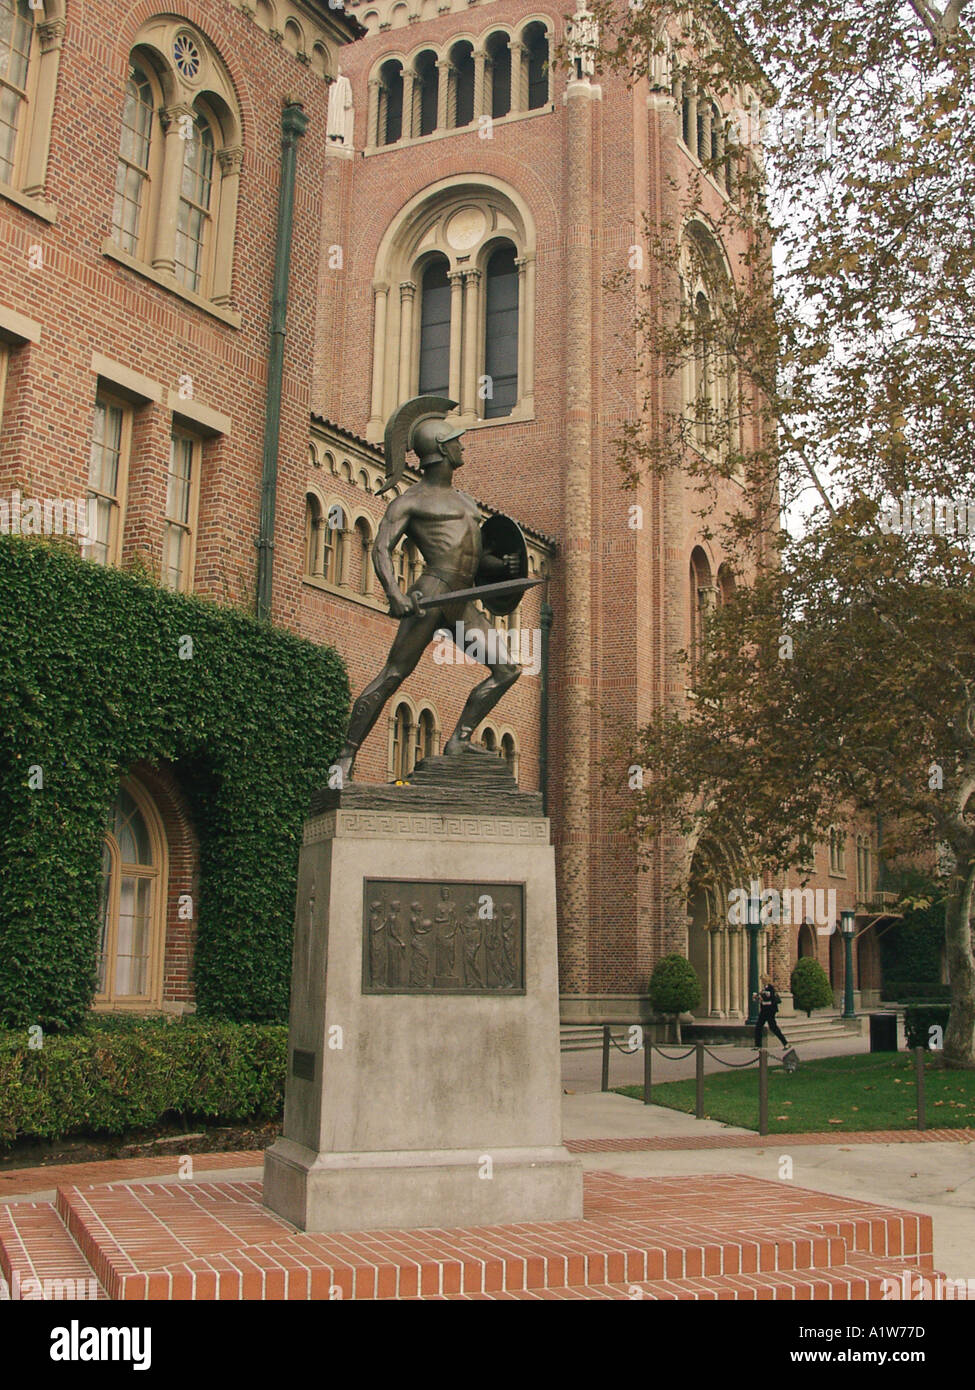 USC statue of Tommy Trojan on campus of University of Southern California Los Angeles Stock Photo